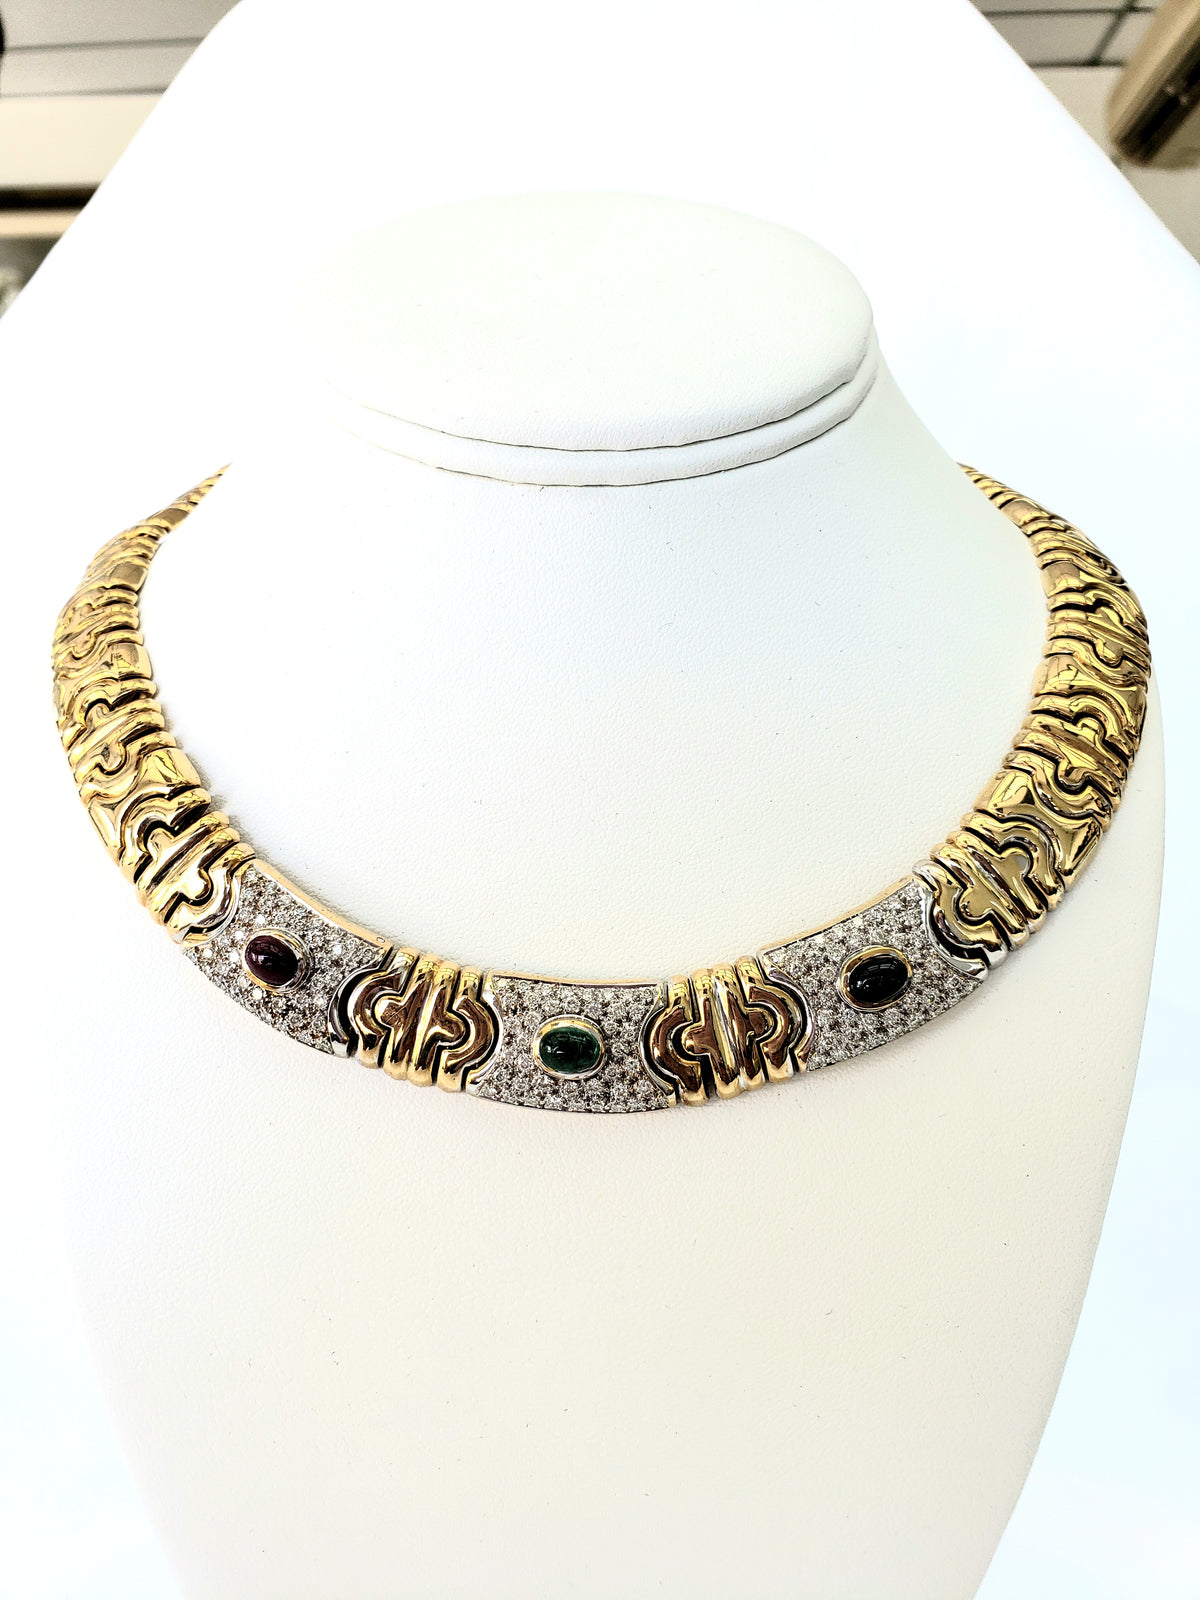 Heavy 18k Yellow Gold Diamond Italian Necklace with Cabochon Cut Emerald, Ruby, and Sapphire